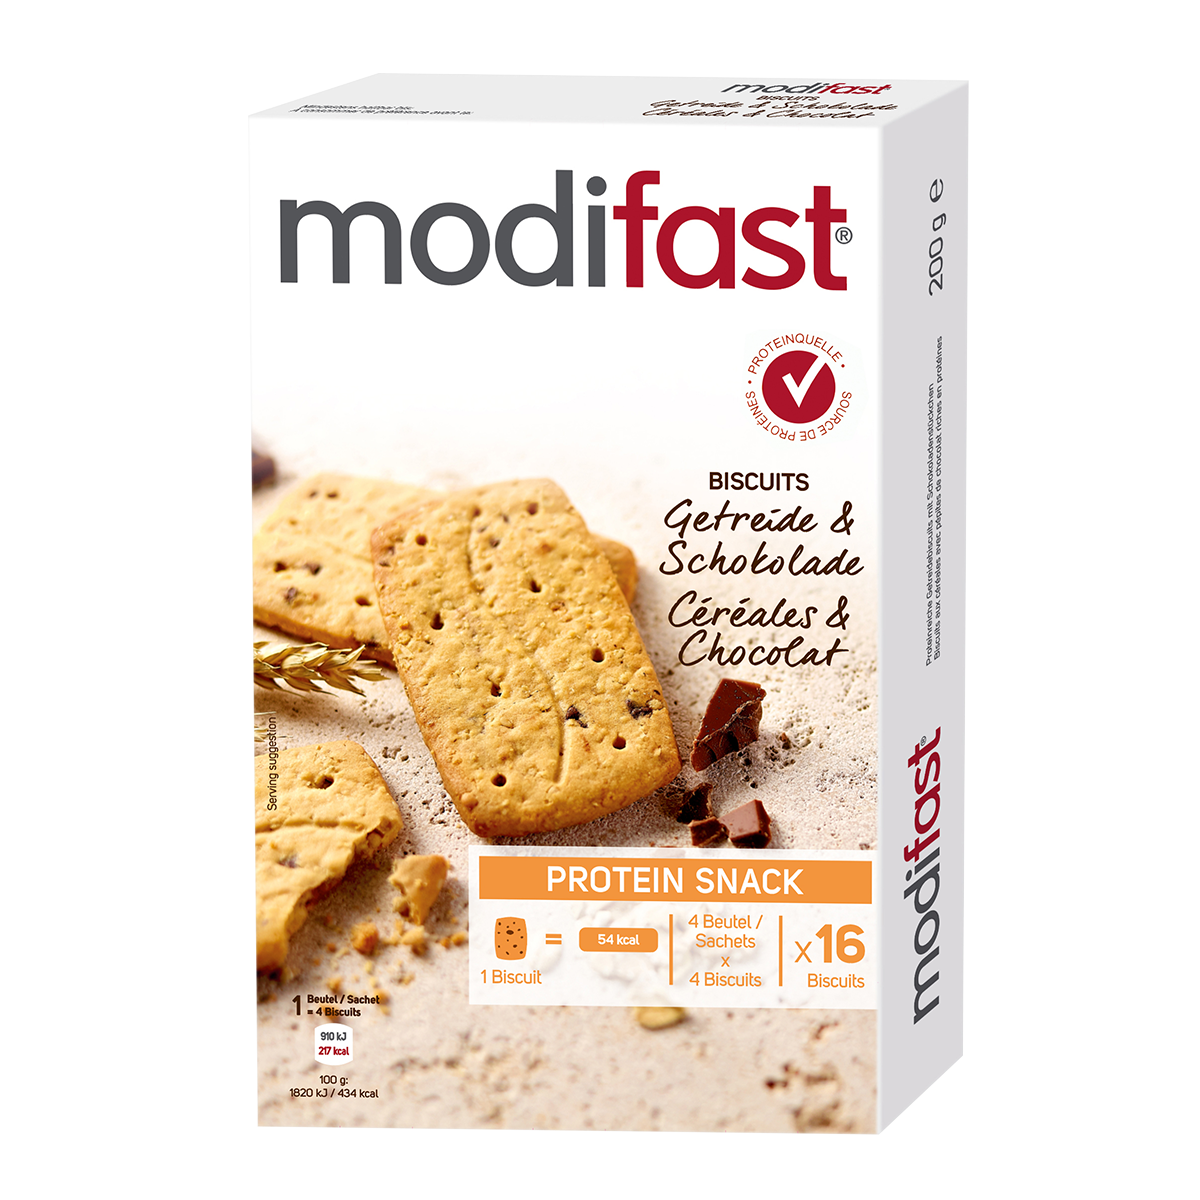 Modifast Biscuits Cereale Chocolat